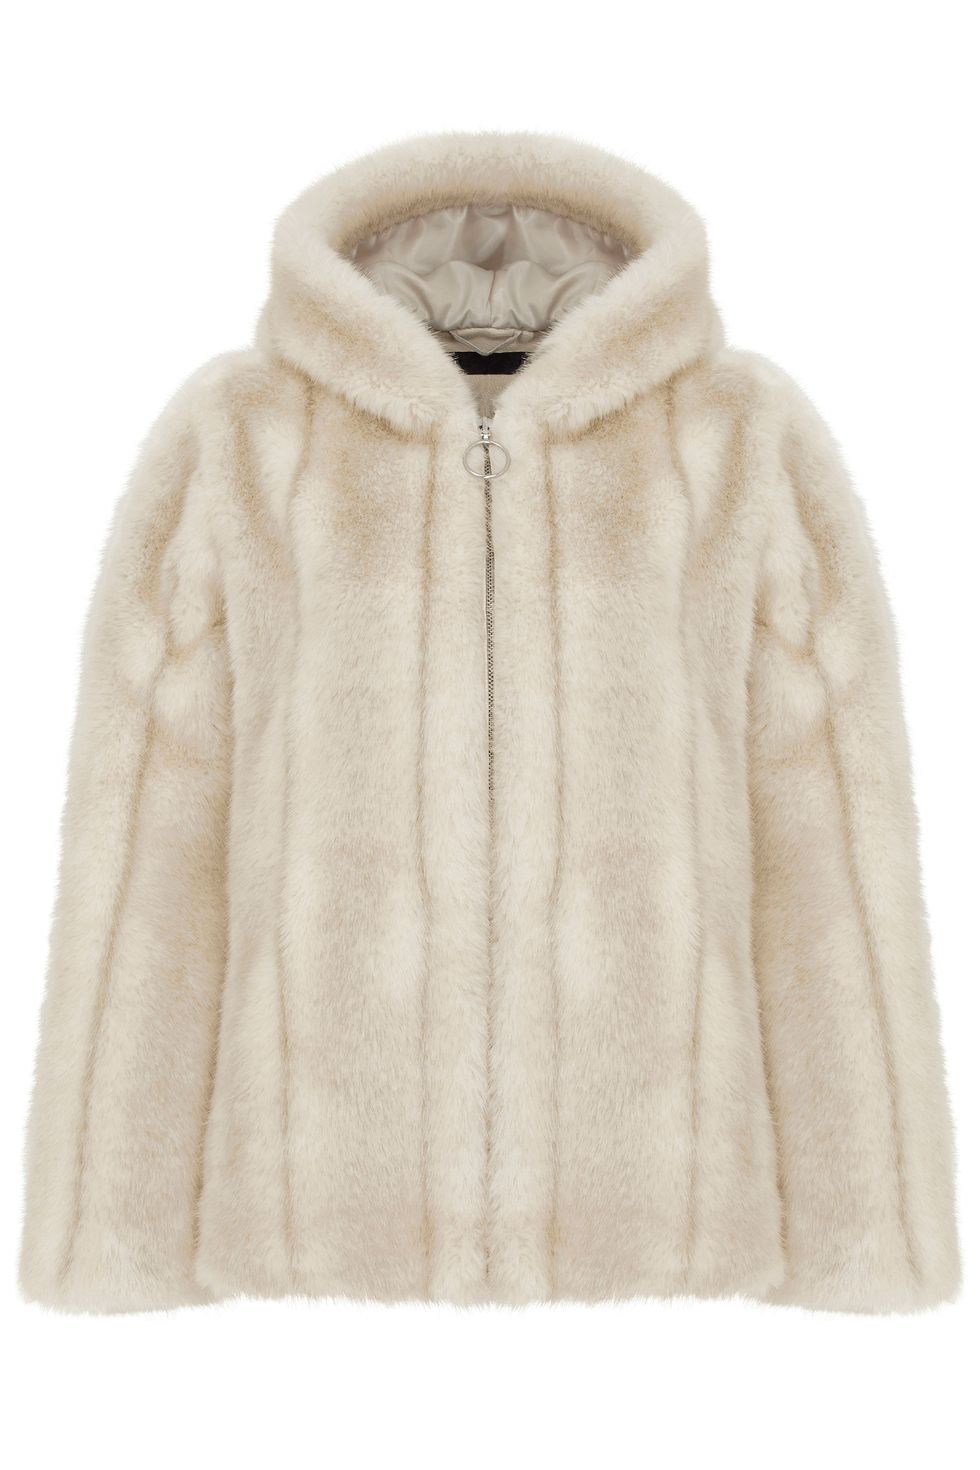 Product, Brown, Sleeve, Textile, Outerwear, White, Natural material, Fur clothing, Fashion, Jacket, 